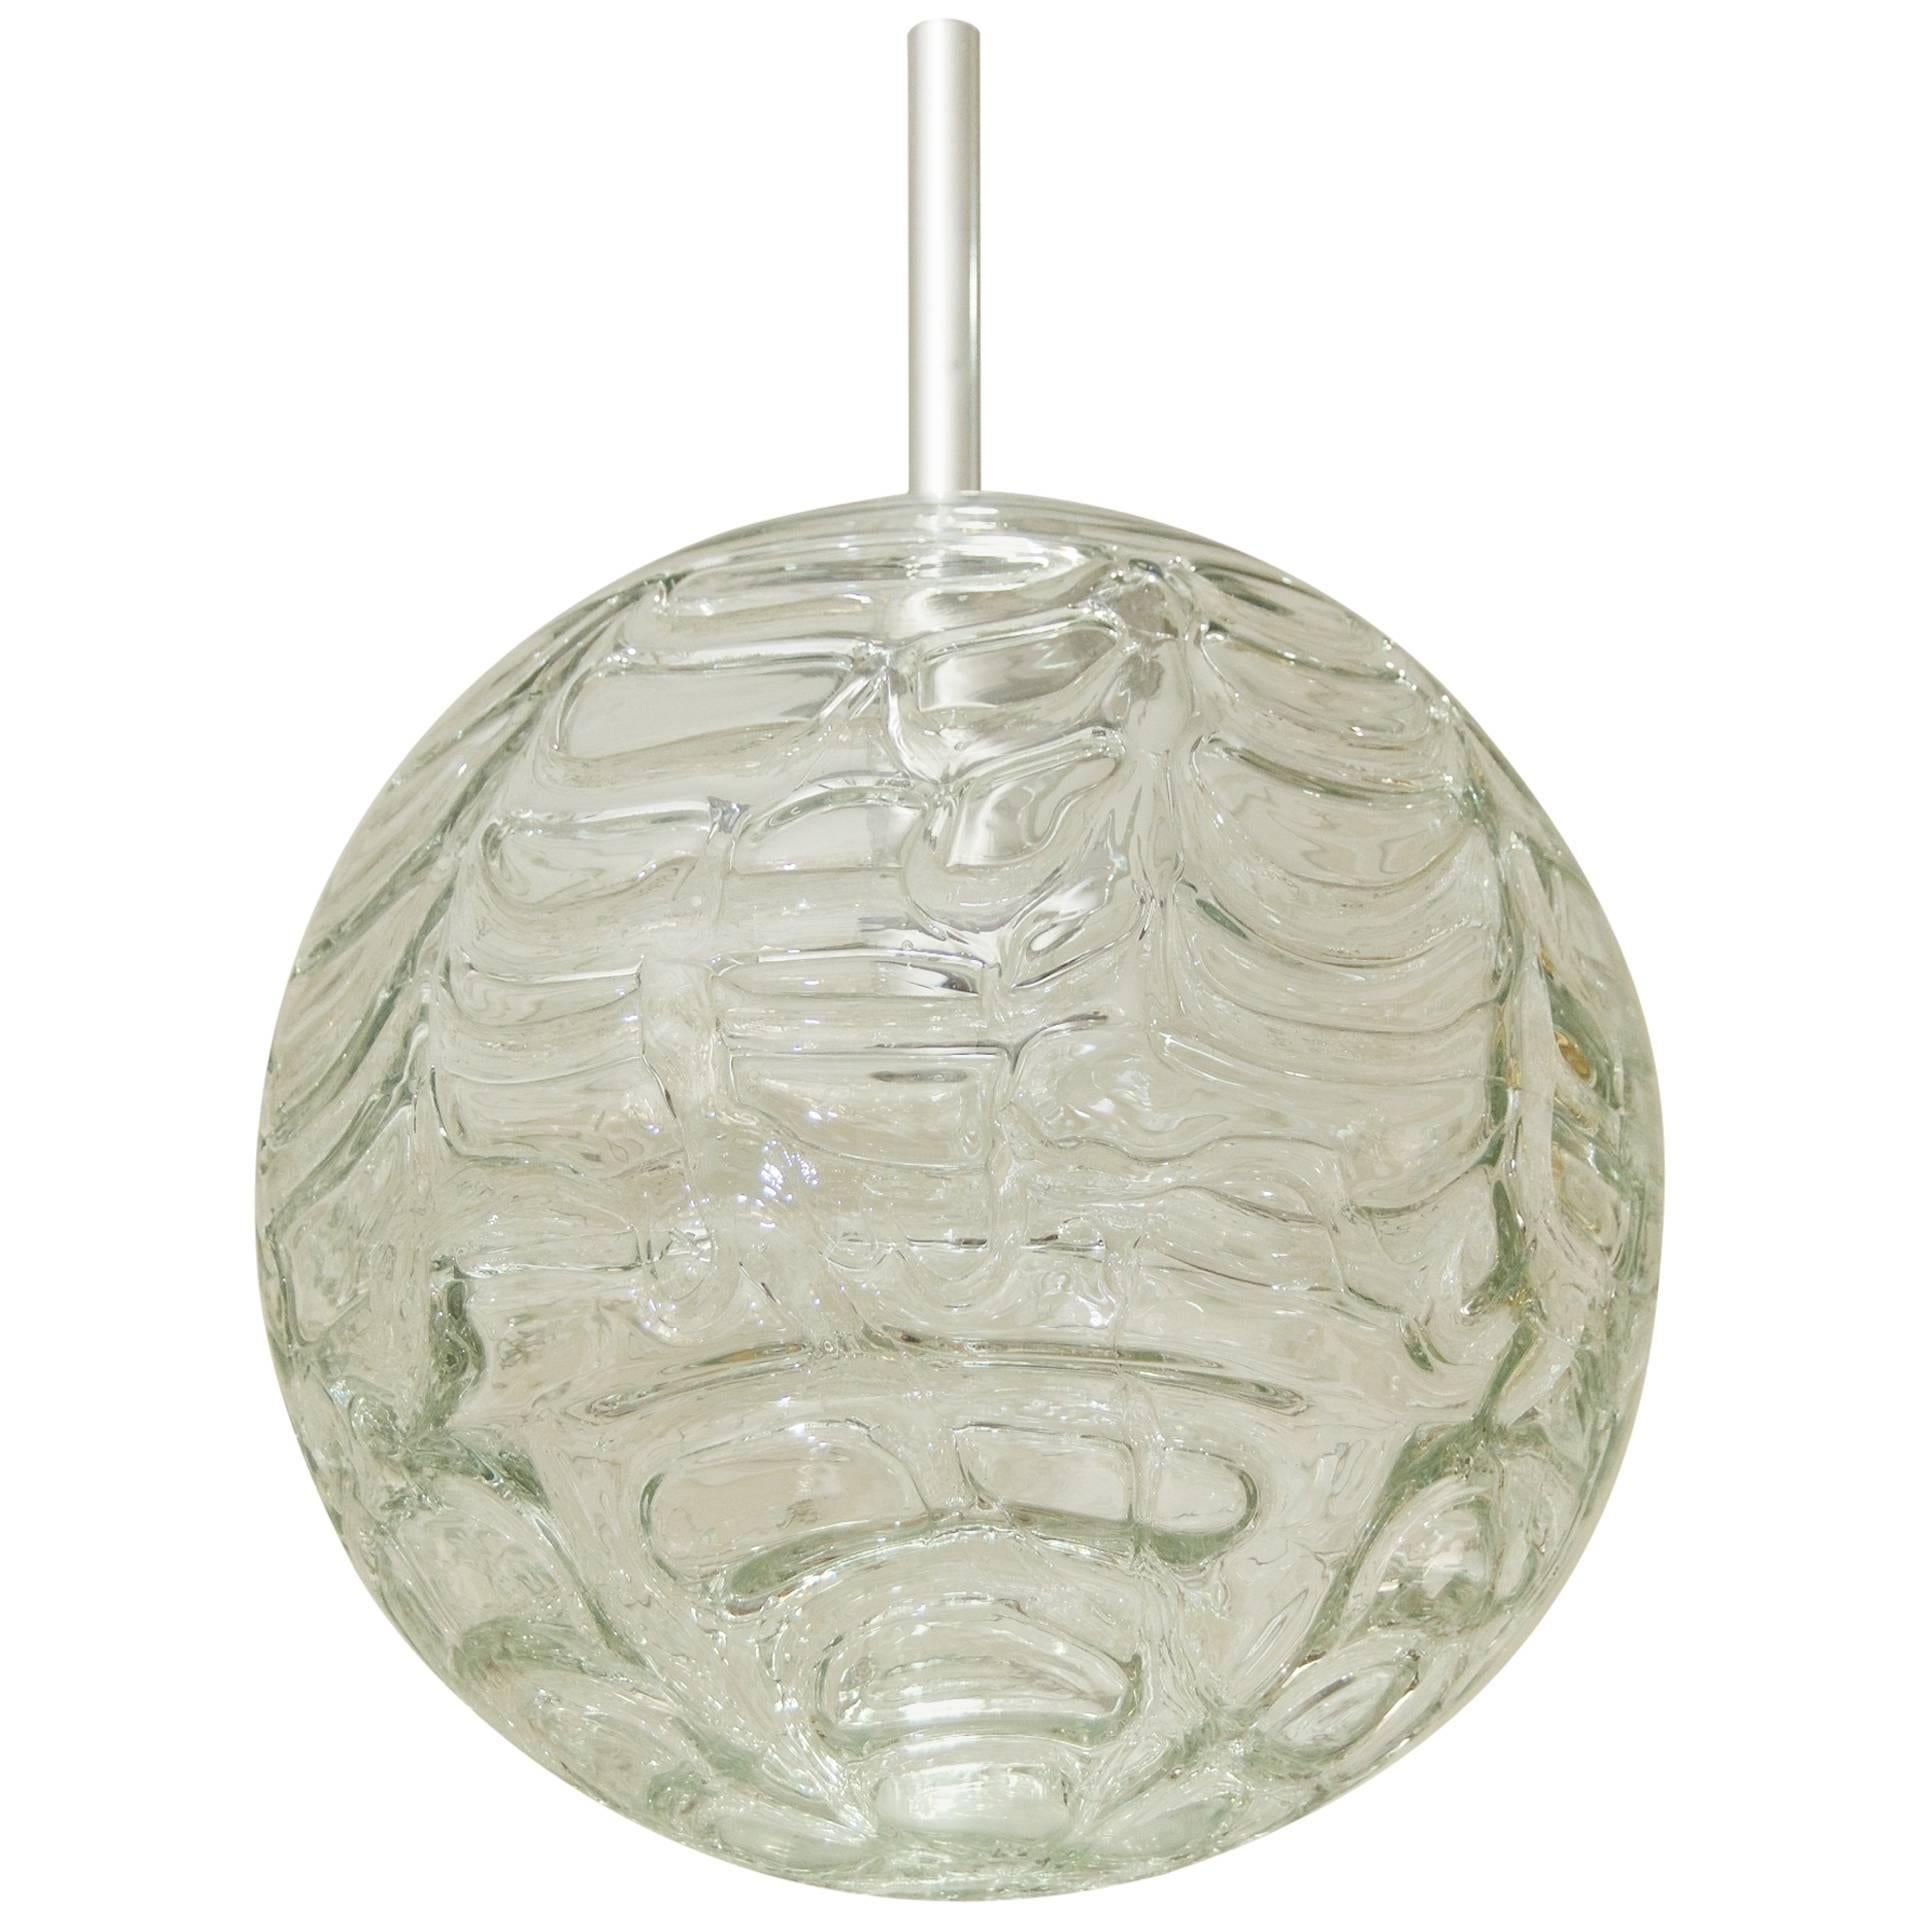 Doria Organic Patterned Clear Glass Globe For Sale